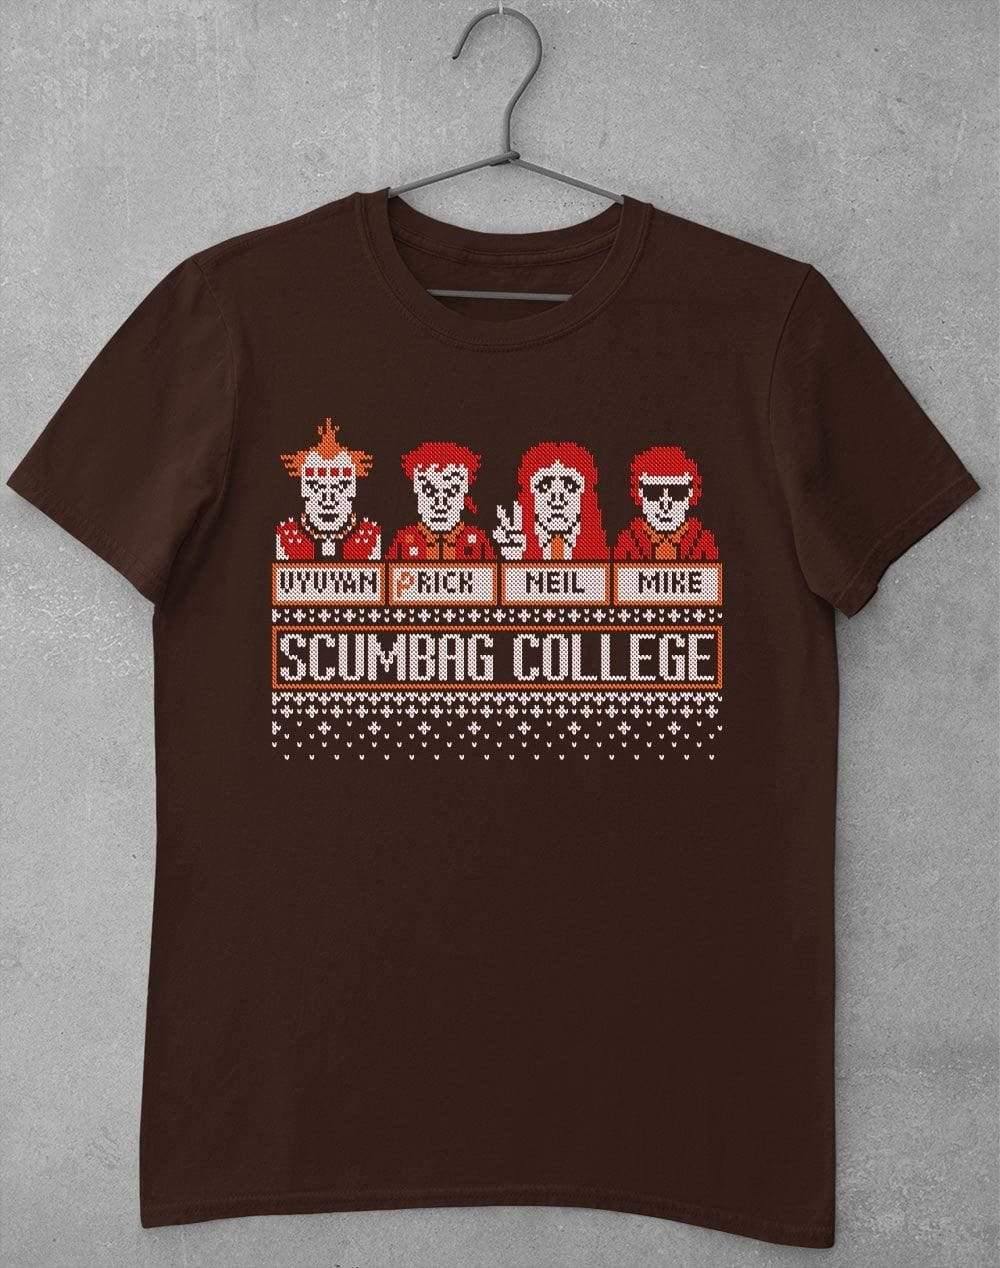 Scumbag College Festive Knitted-Look T-Shirt S / Dark Chocolate  - Off World Tees